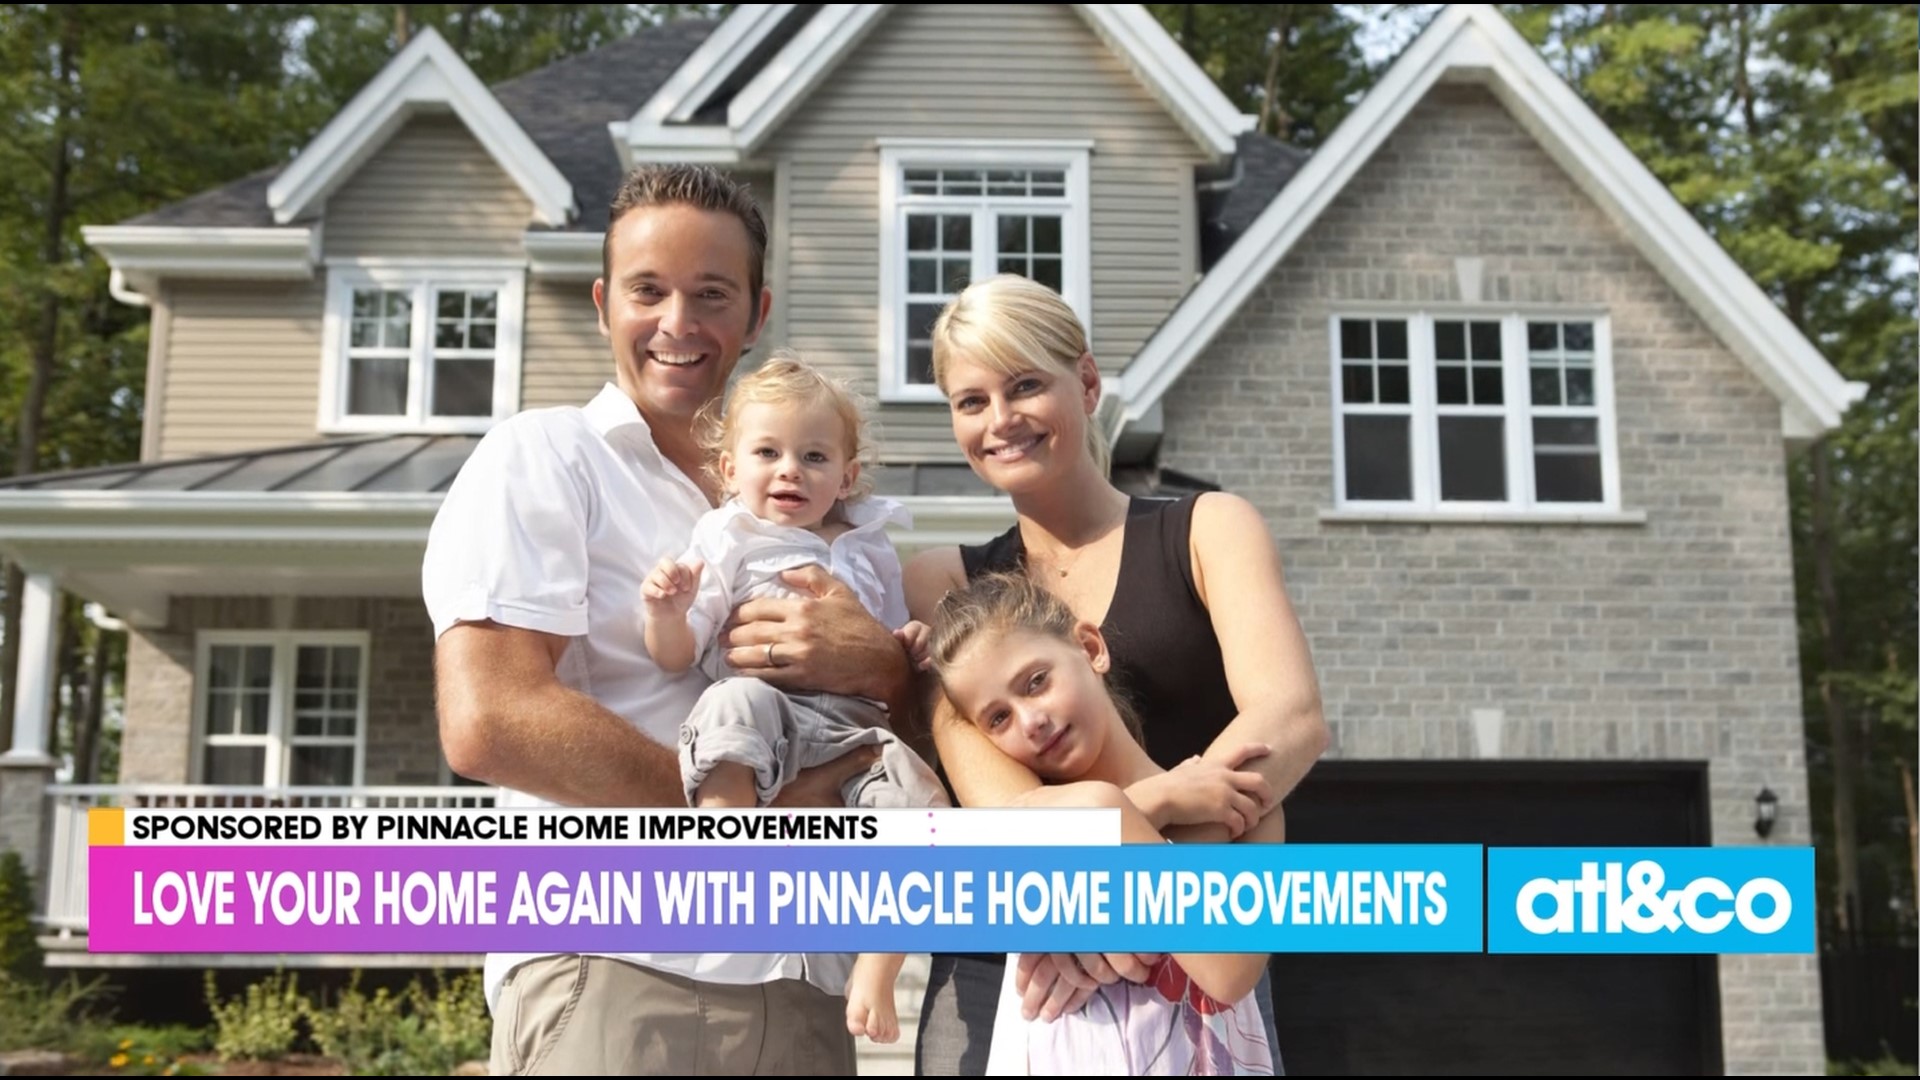 Fall in love with your home again with the remodel experts at Pinnacle Home Improvements. The first 20 callers get $500 off their entire project.